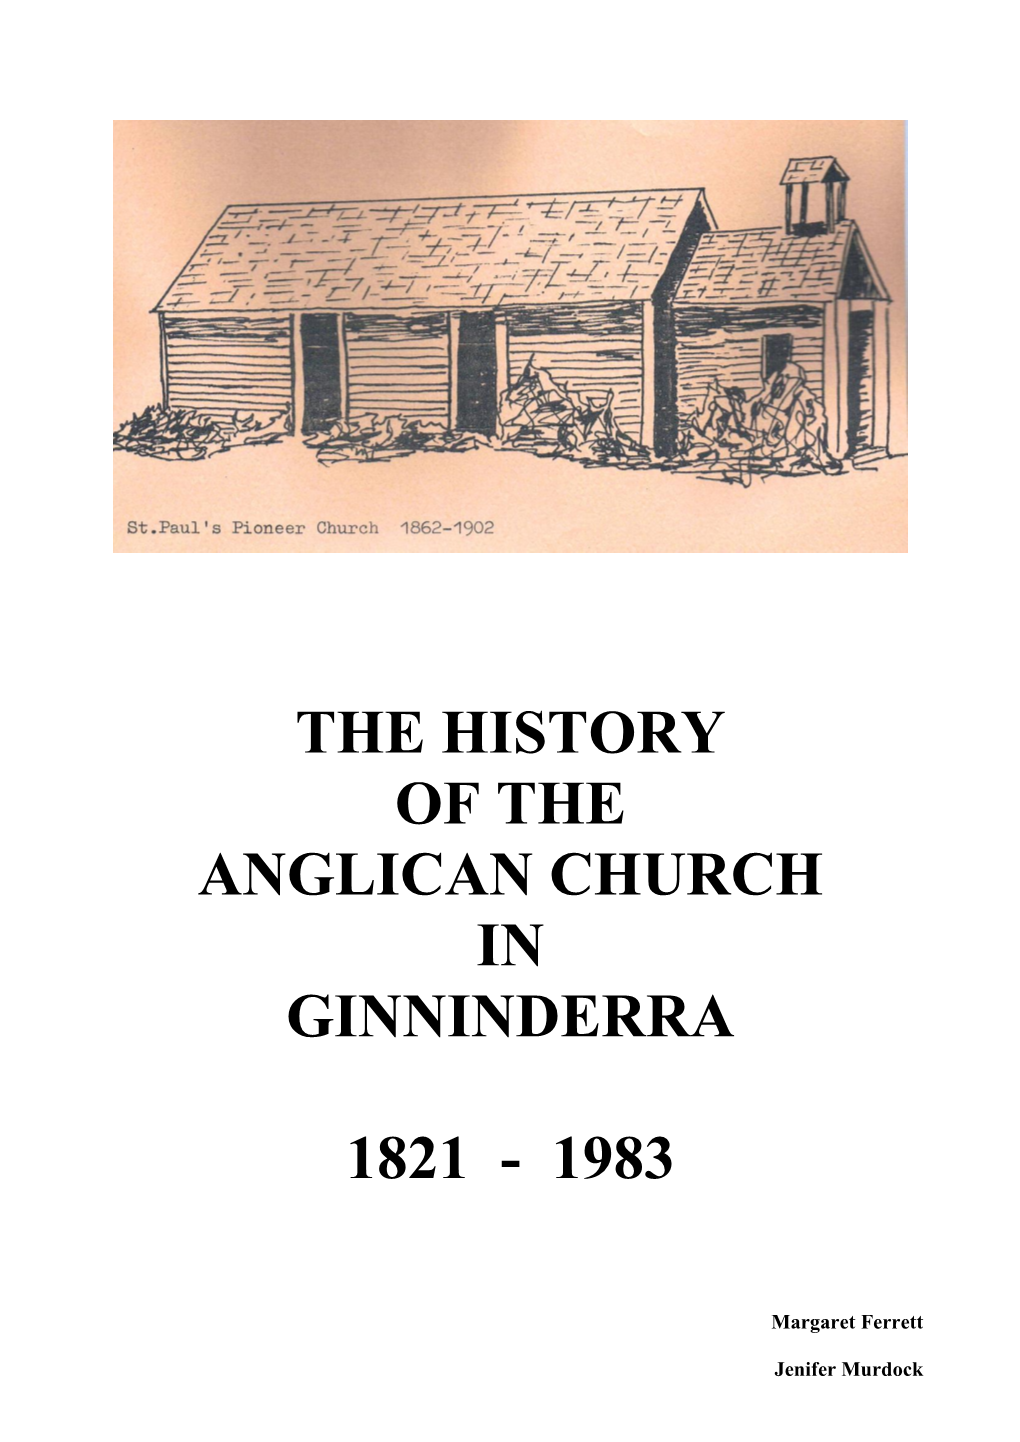 The History of the Anglican Church in Ginninderra 1821